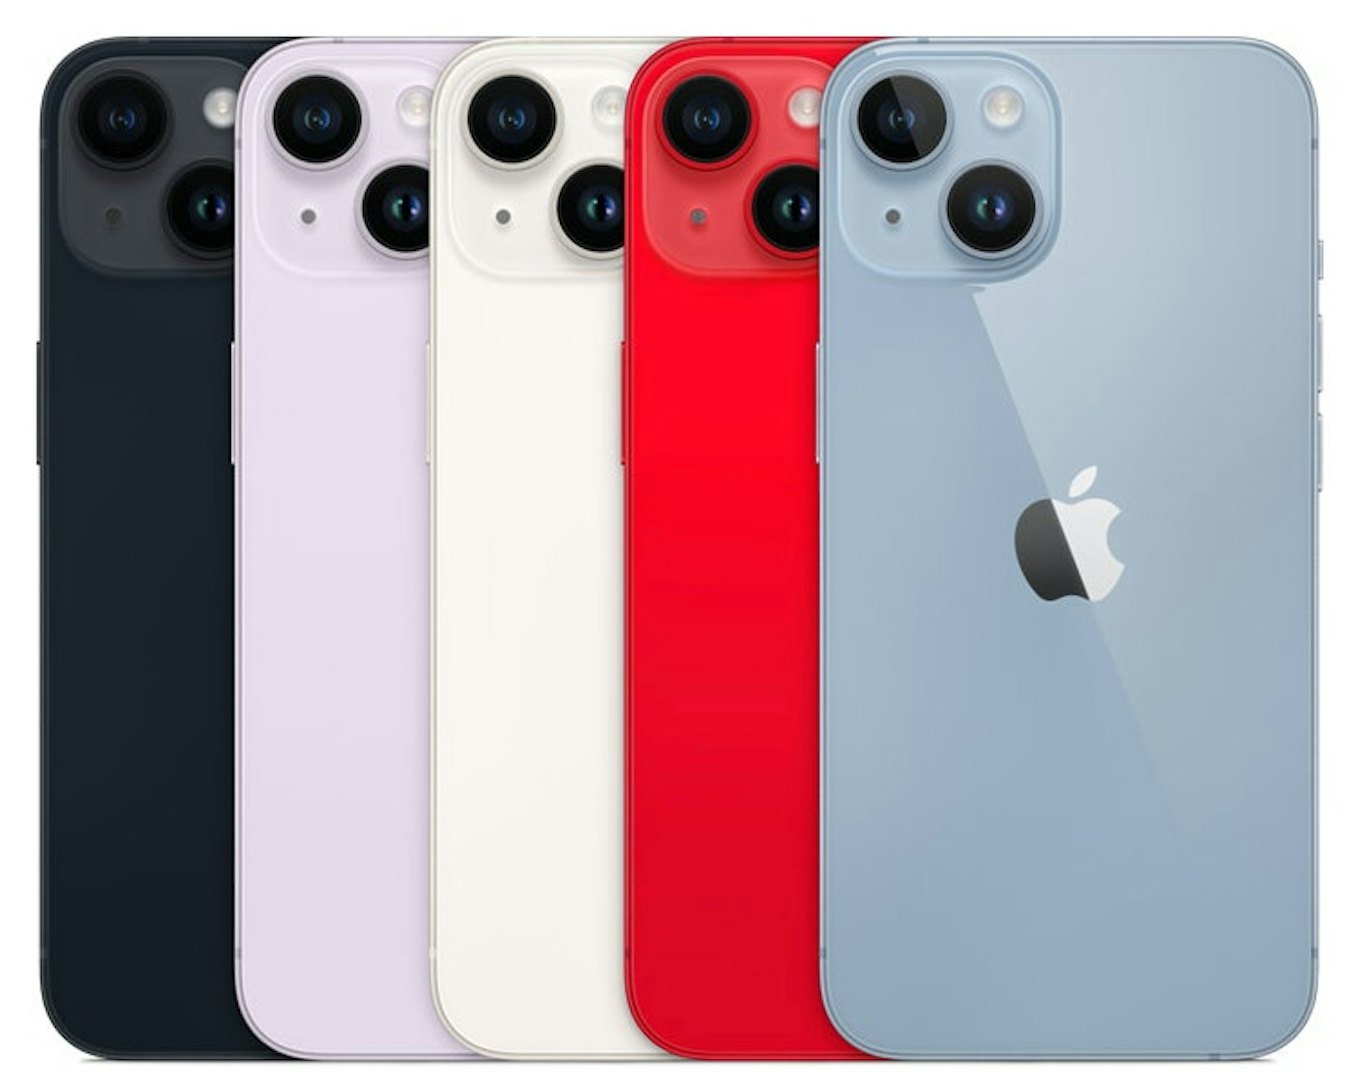 What Colors Does The iPhone 14 Come In?